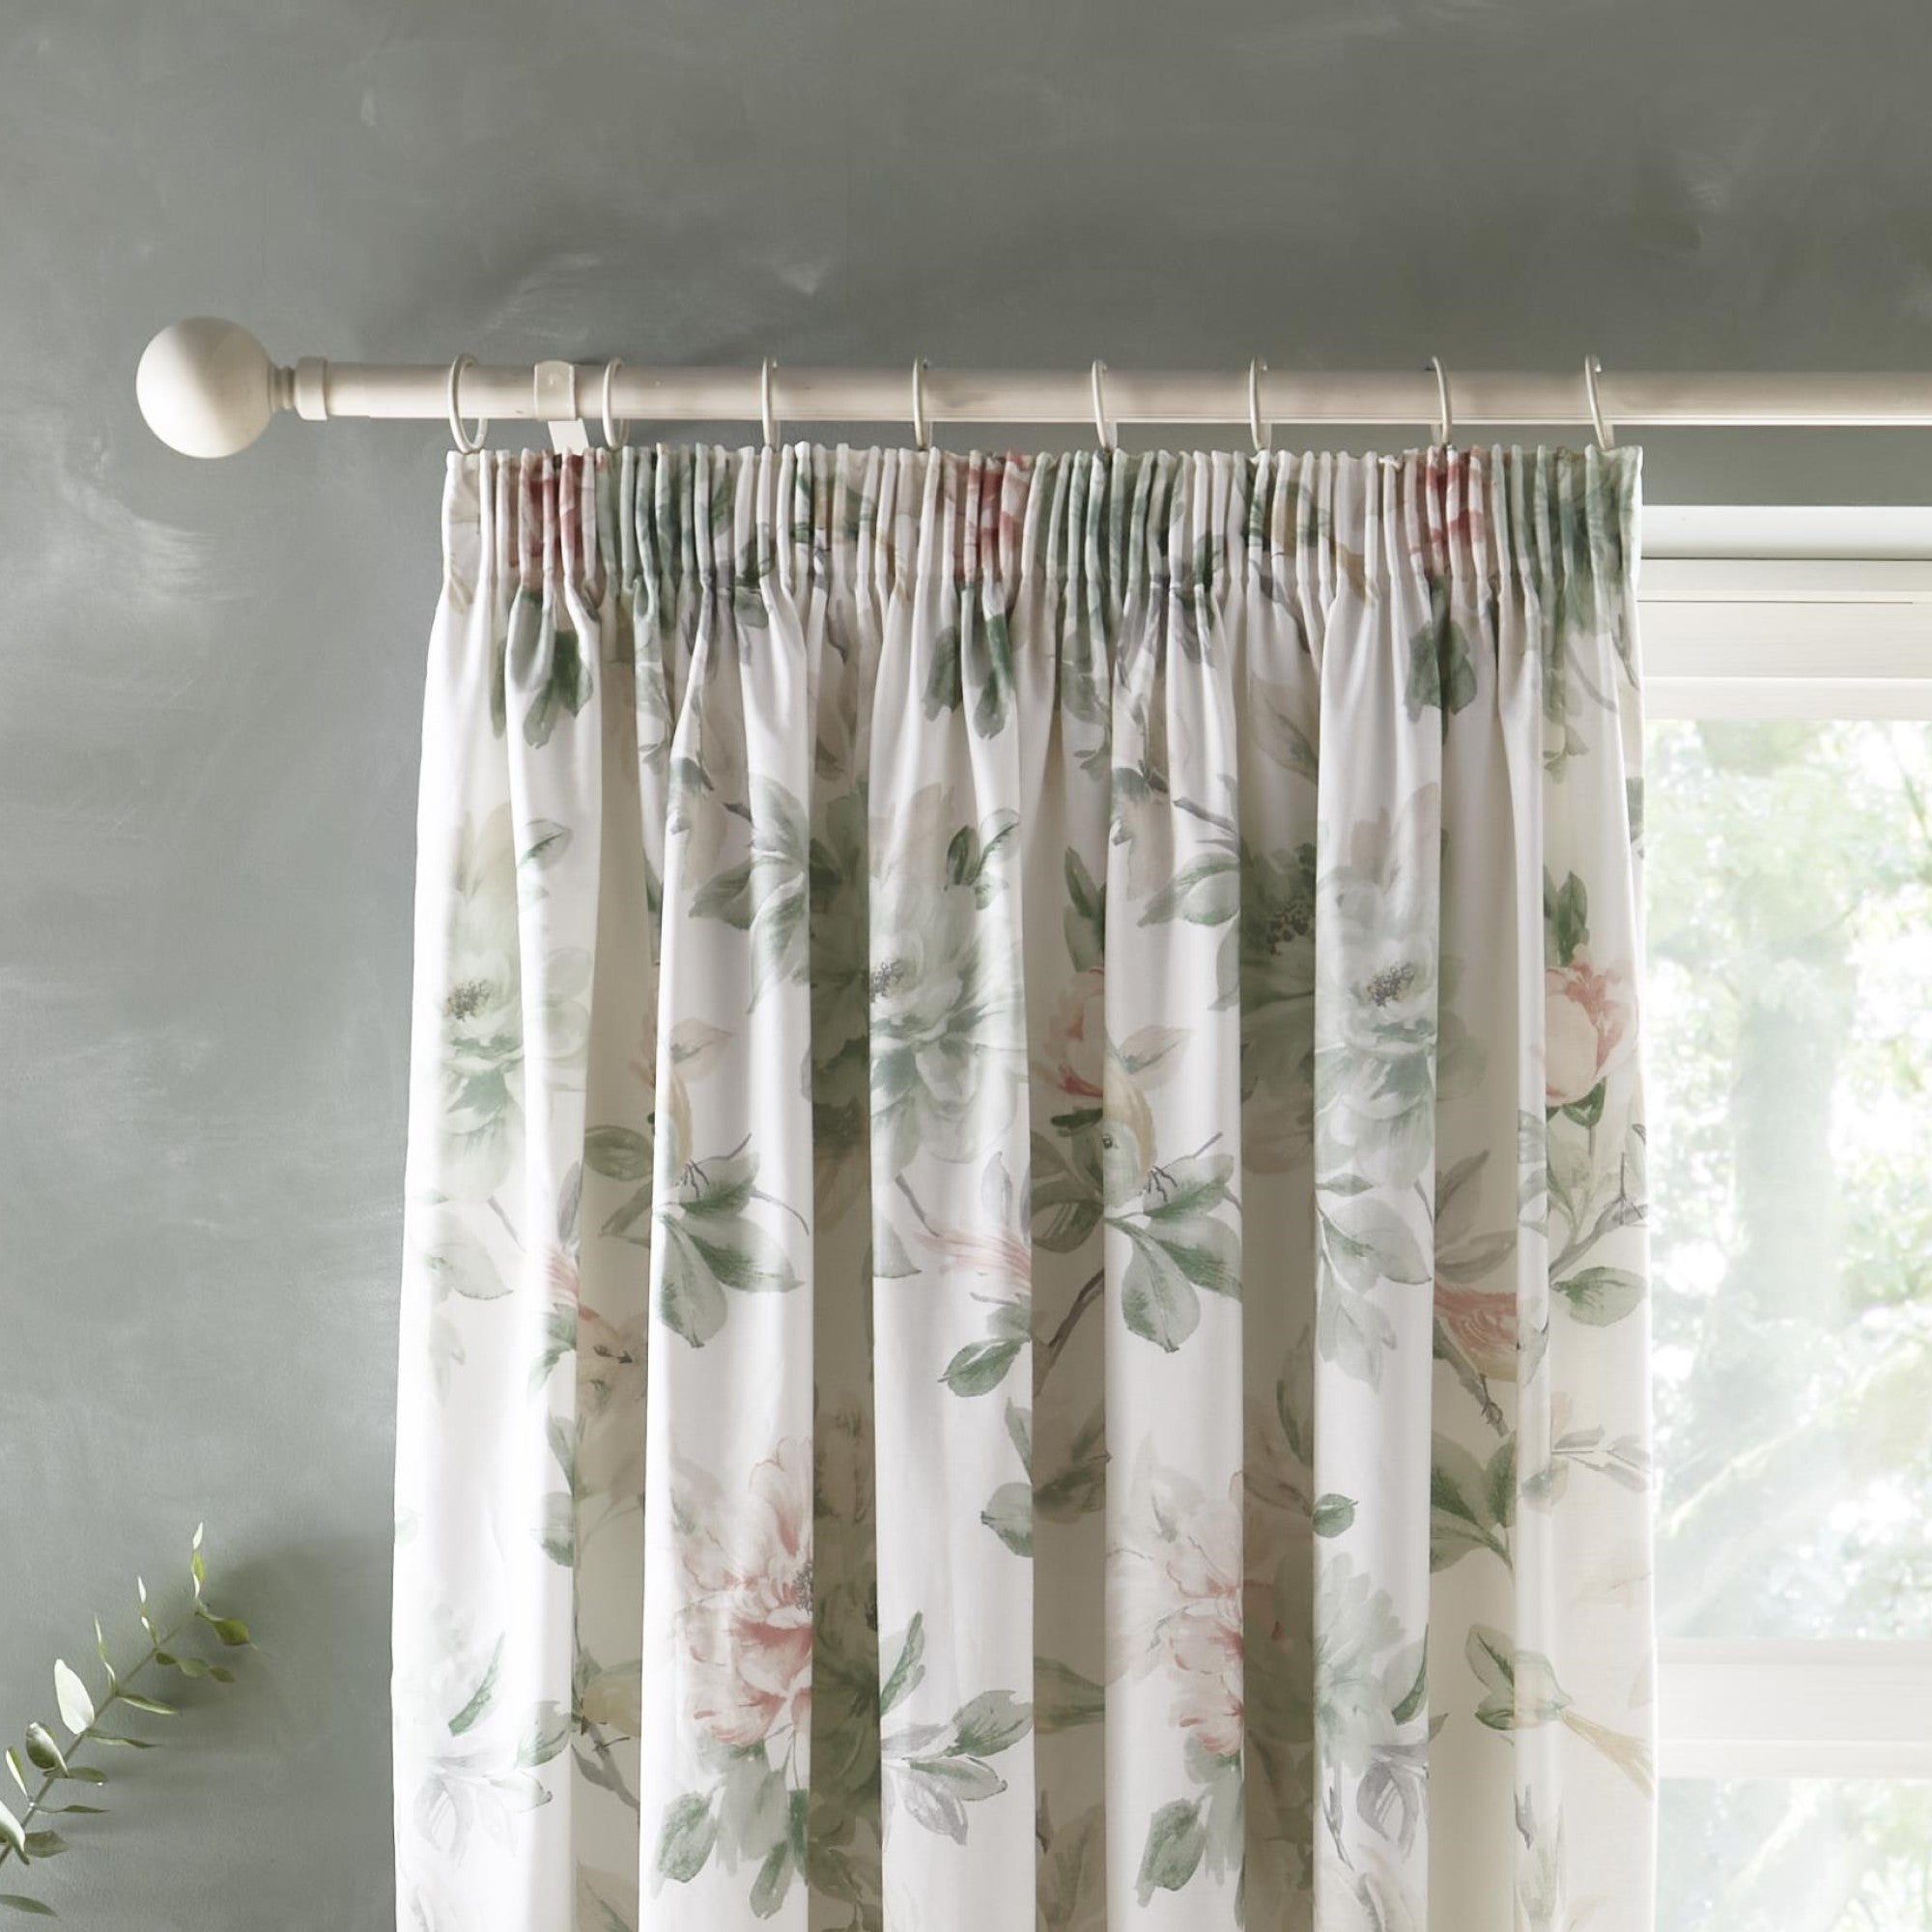 Pair of Pencil Pleat Curtains With Tie-Backs Campion by Appletree Heritage in Green/Coral